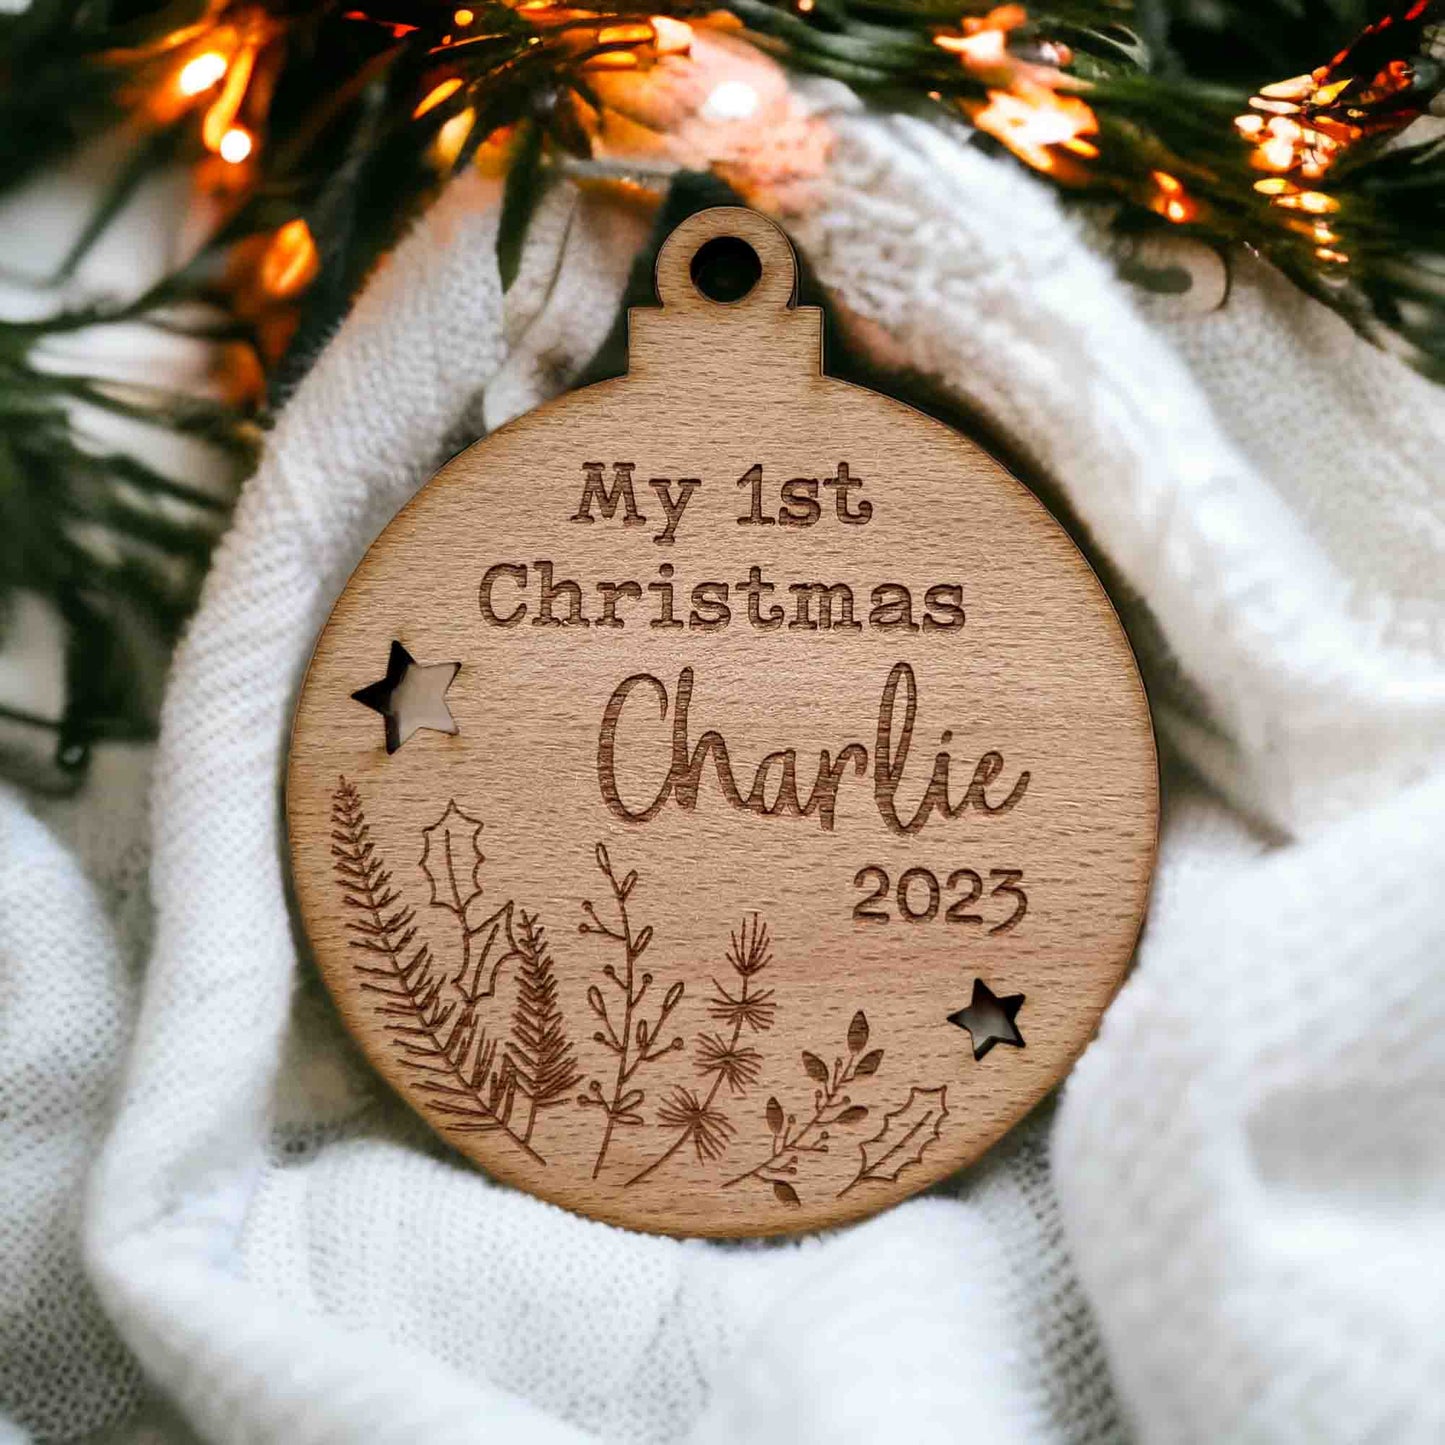 My 1st Christmas Wooden Bauble Photo Prop